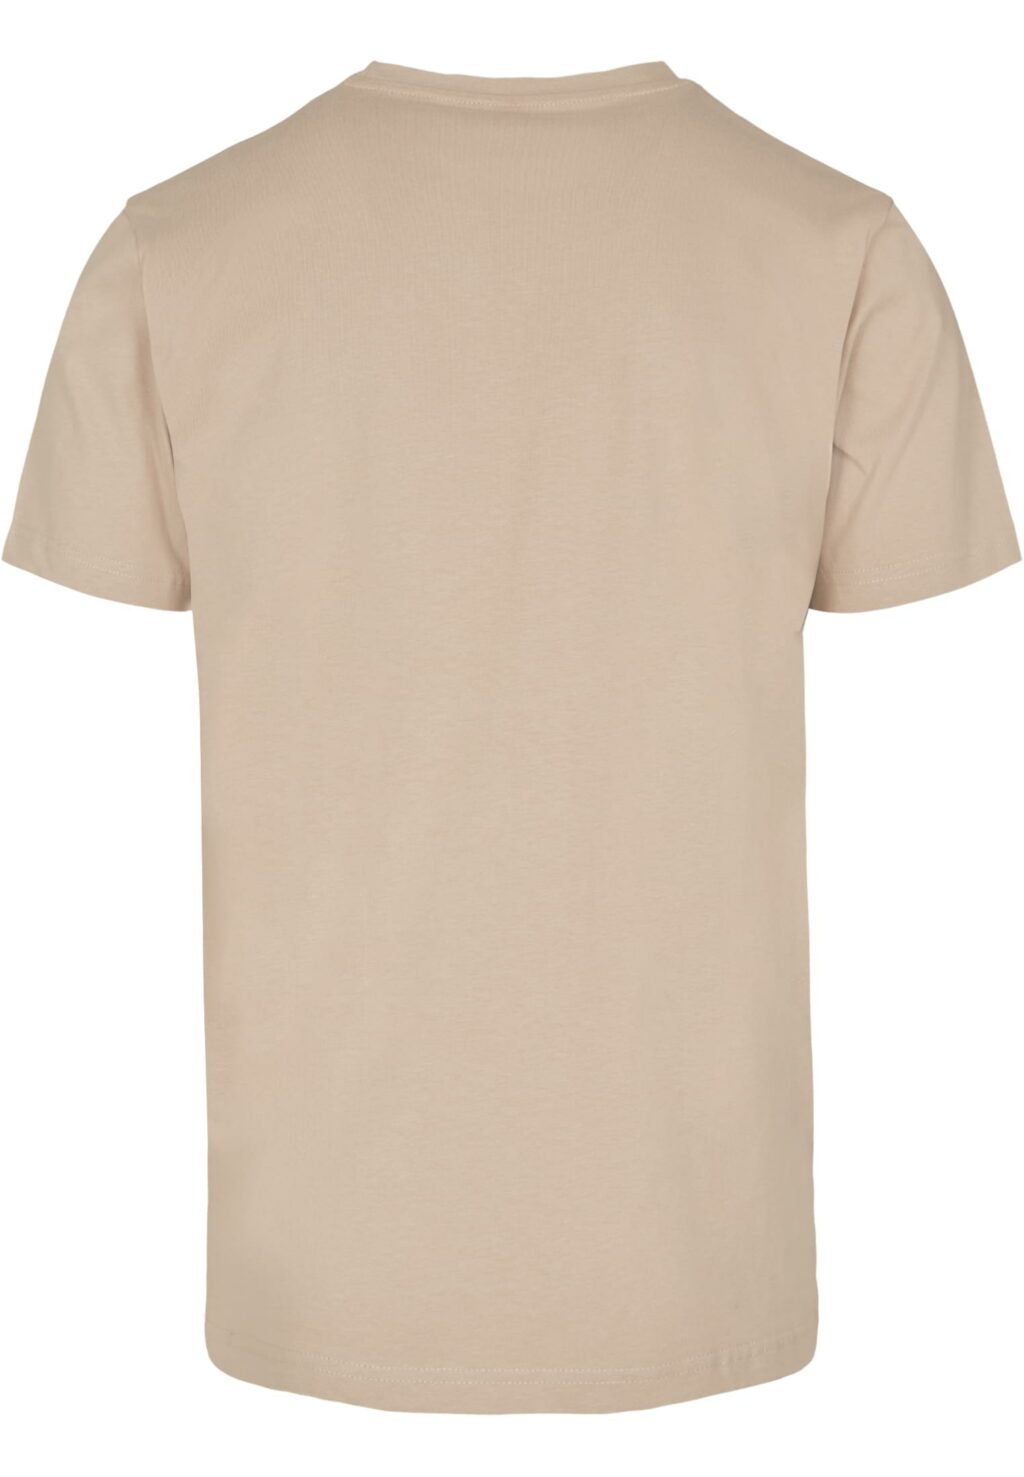 Lost Forever Tee sand MT3136